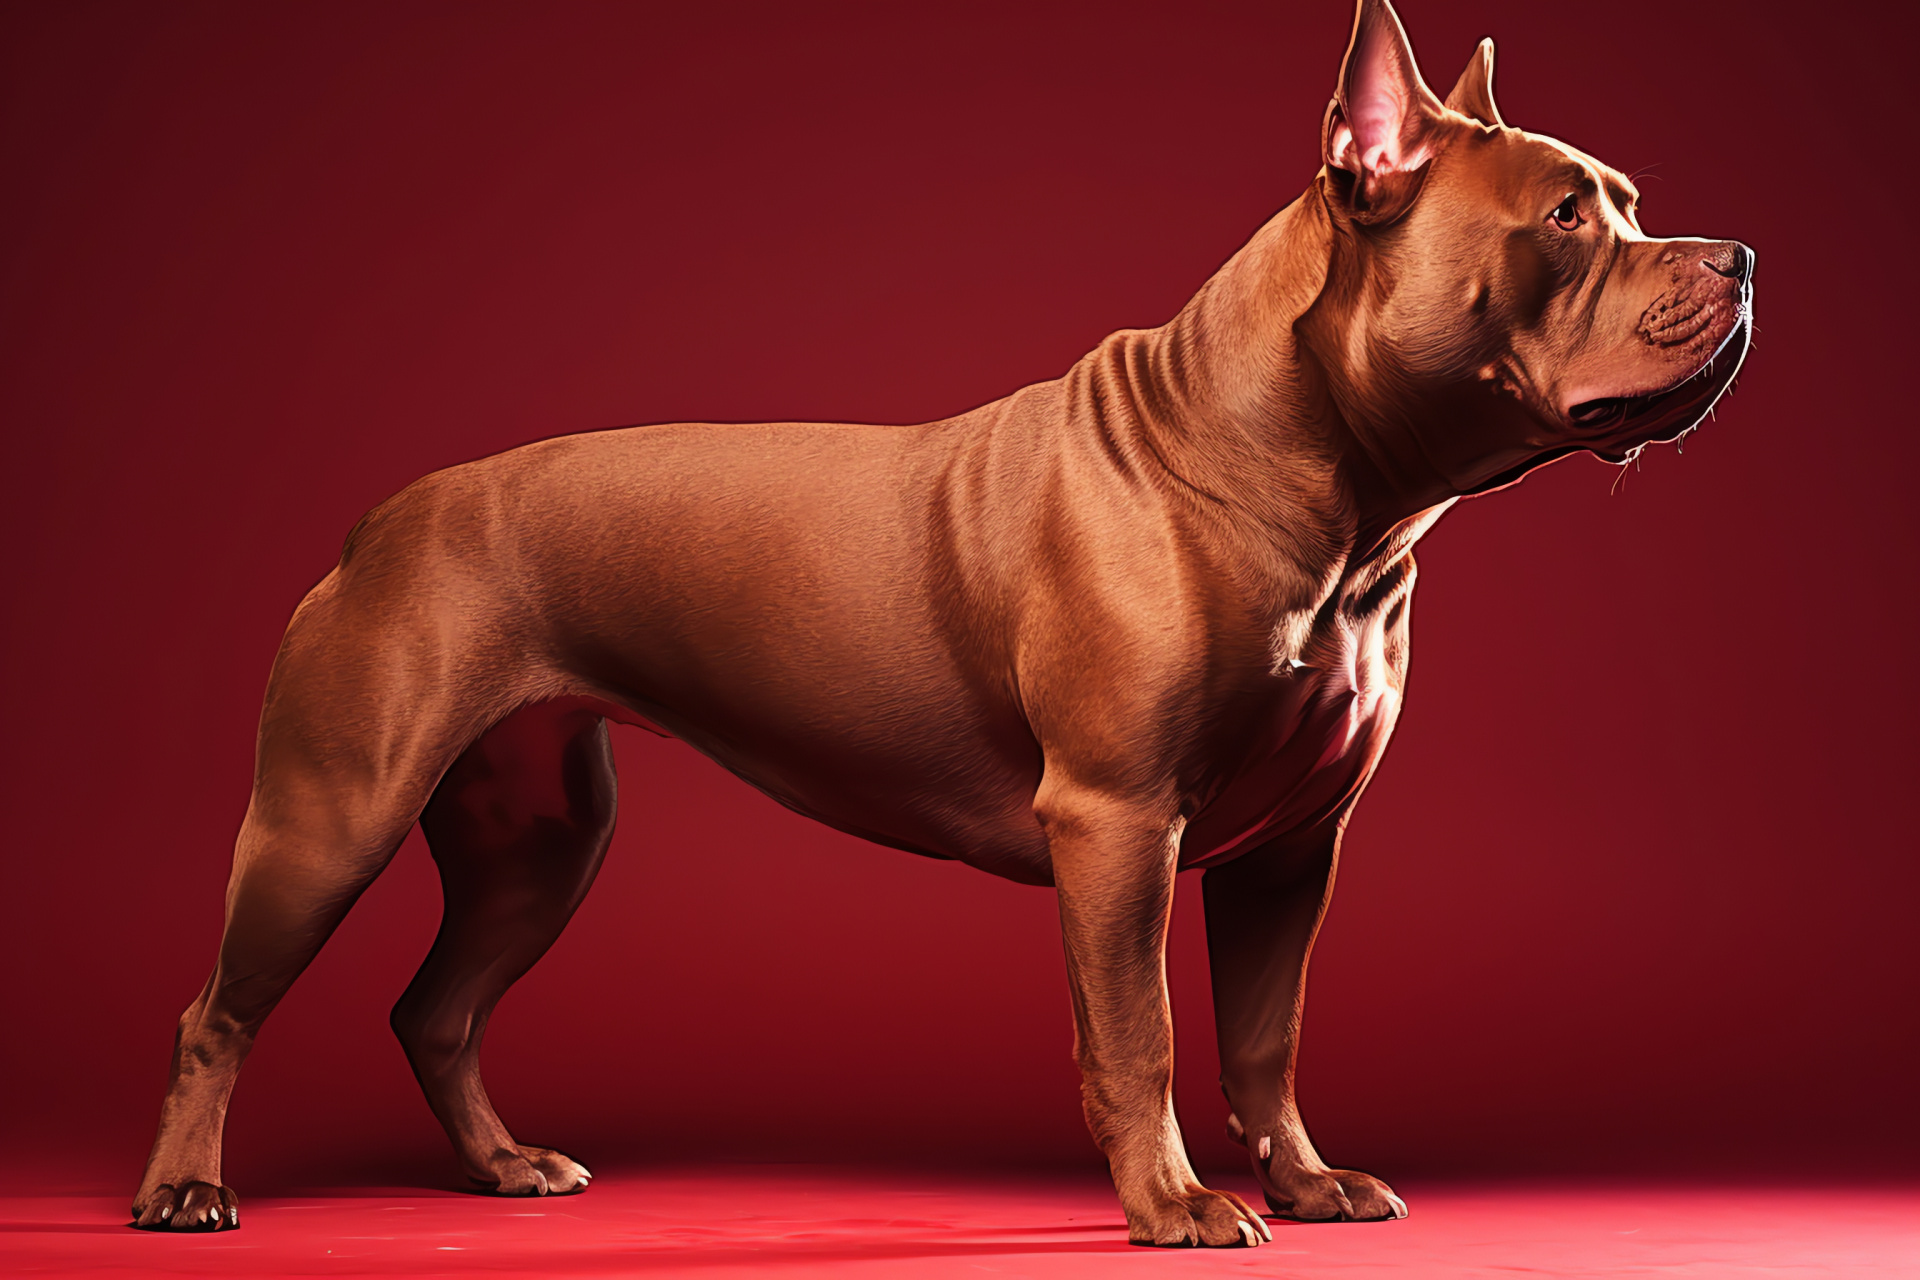 Pitbull breed silhouette, strong canine structure, shiny brown pelt, red background scene, HD Desktop Image